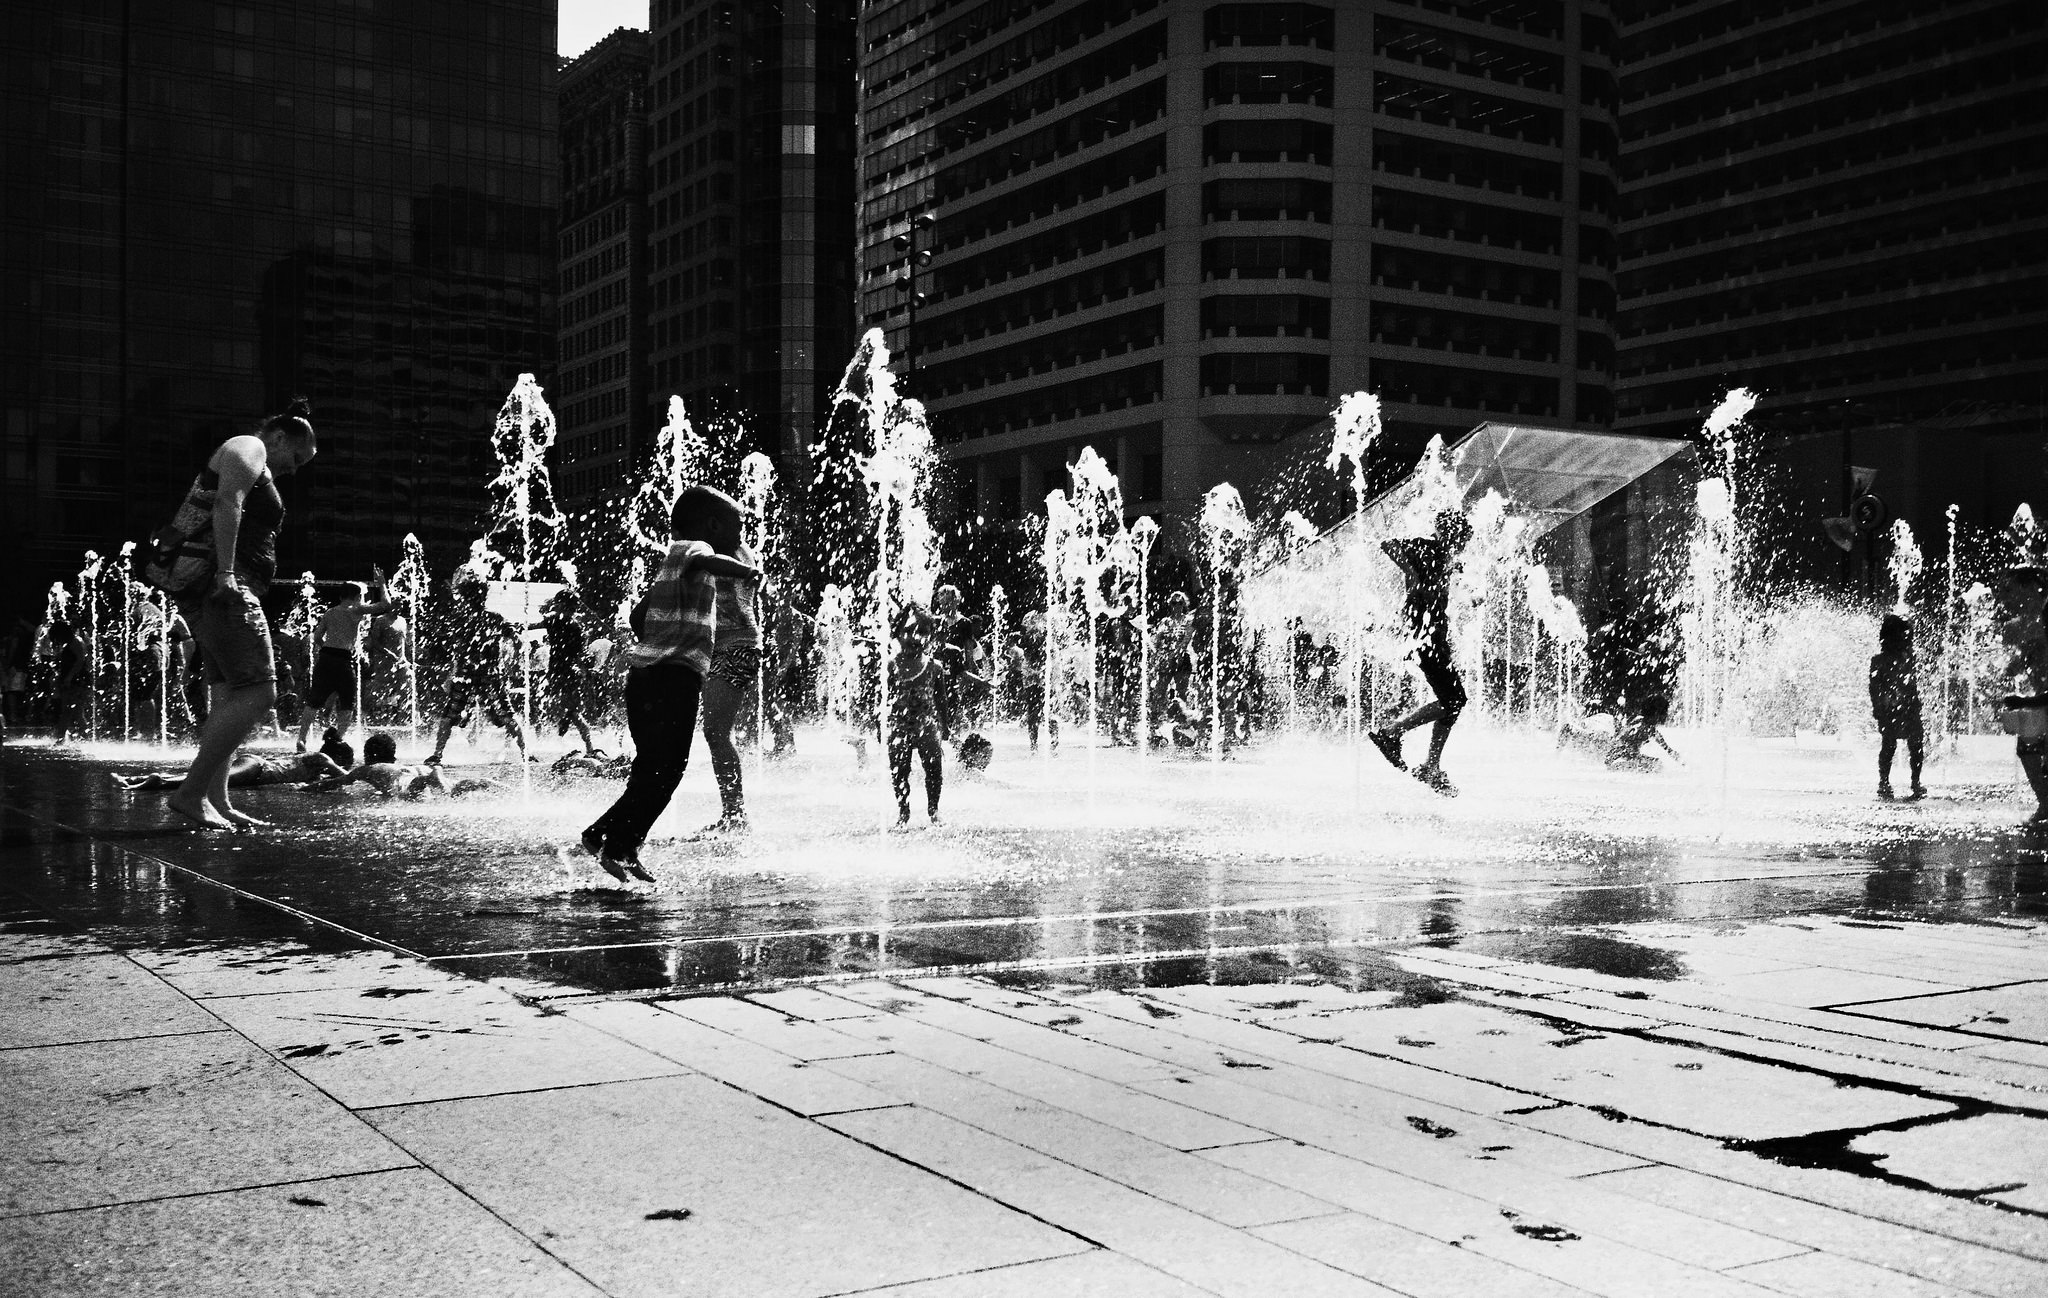 Dilworth Park, August 2015 | David Swift, EOTS Flickr Group